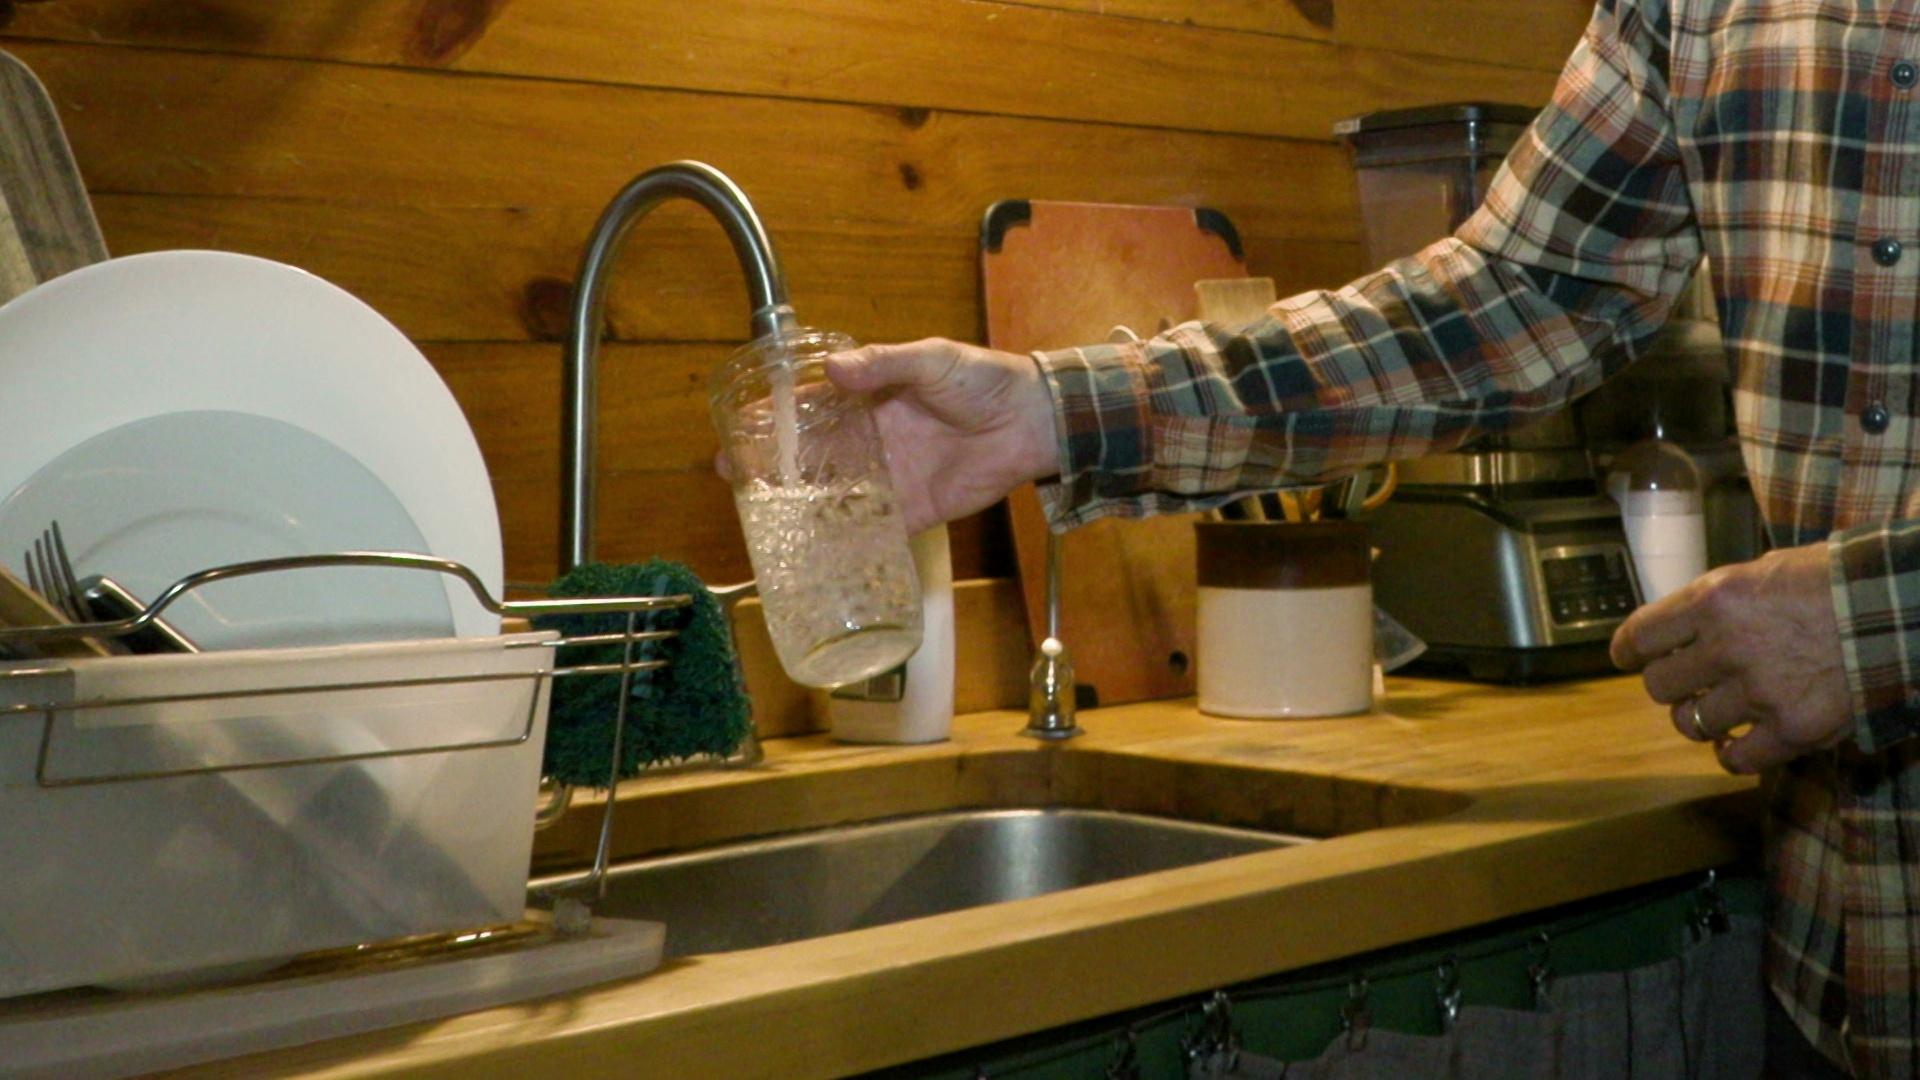 Nelsonville’s water woes: Finding nitrate pollution in wells